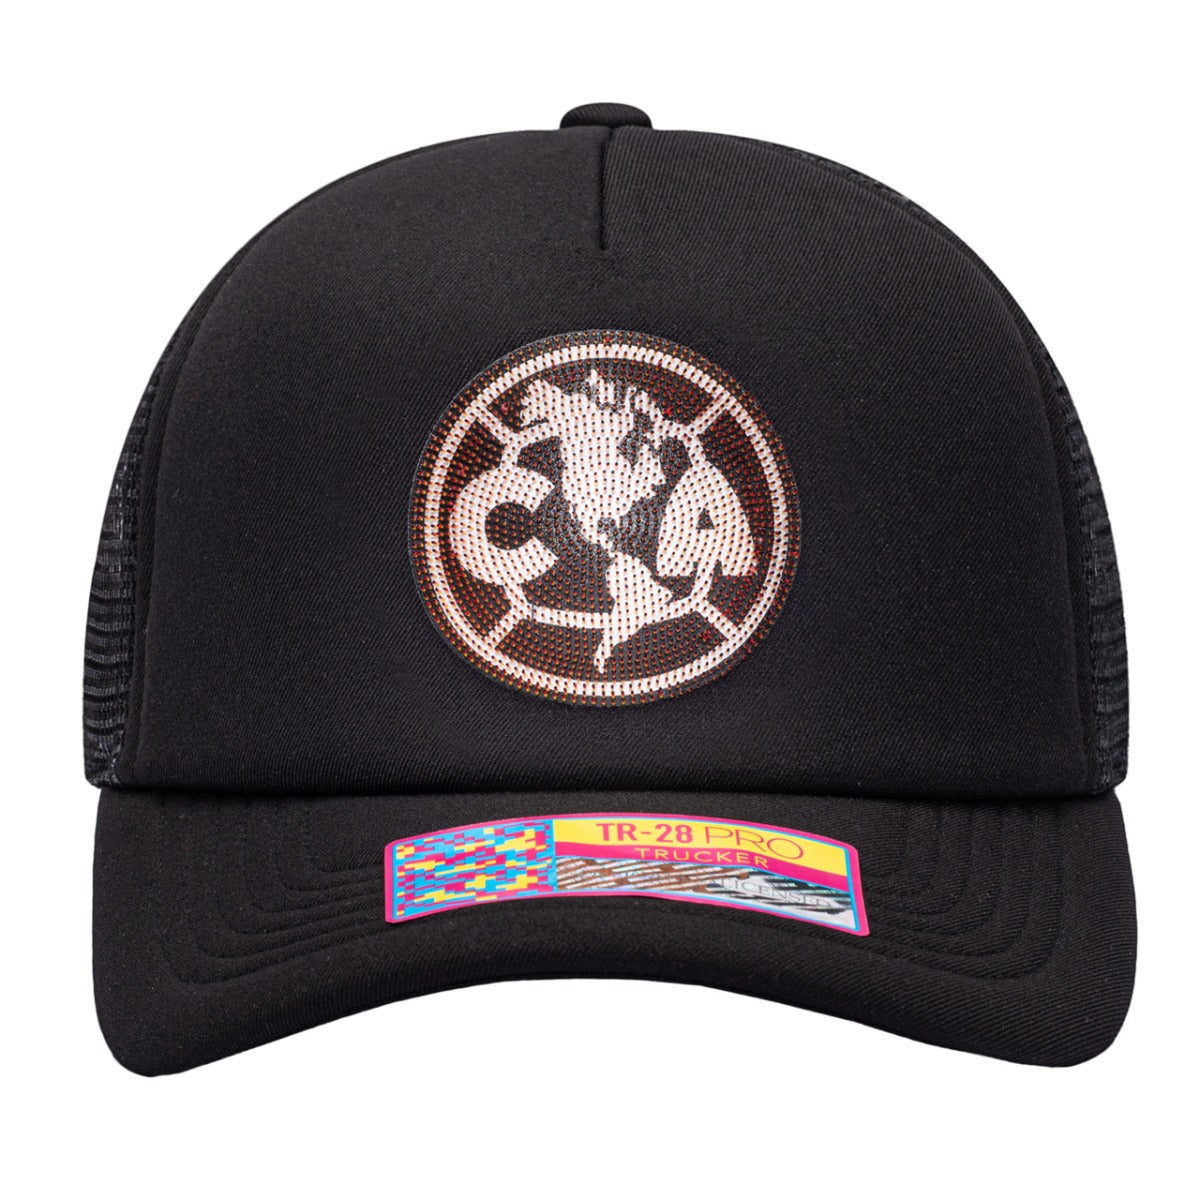 Fi Collection Club America Shield Trucker Hat - Black (Front)